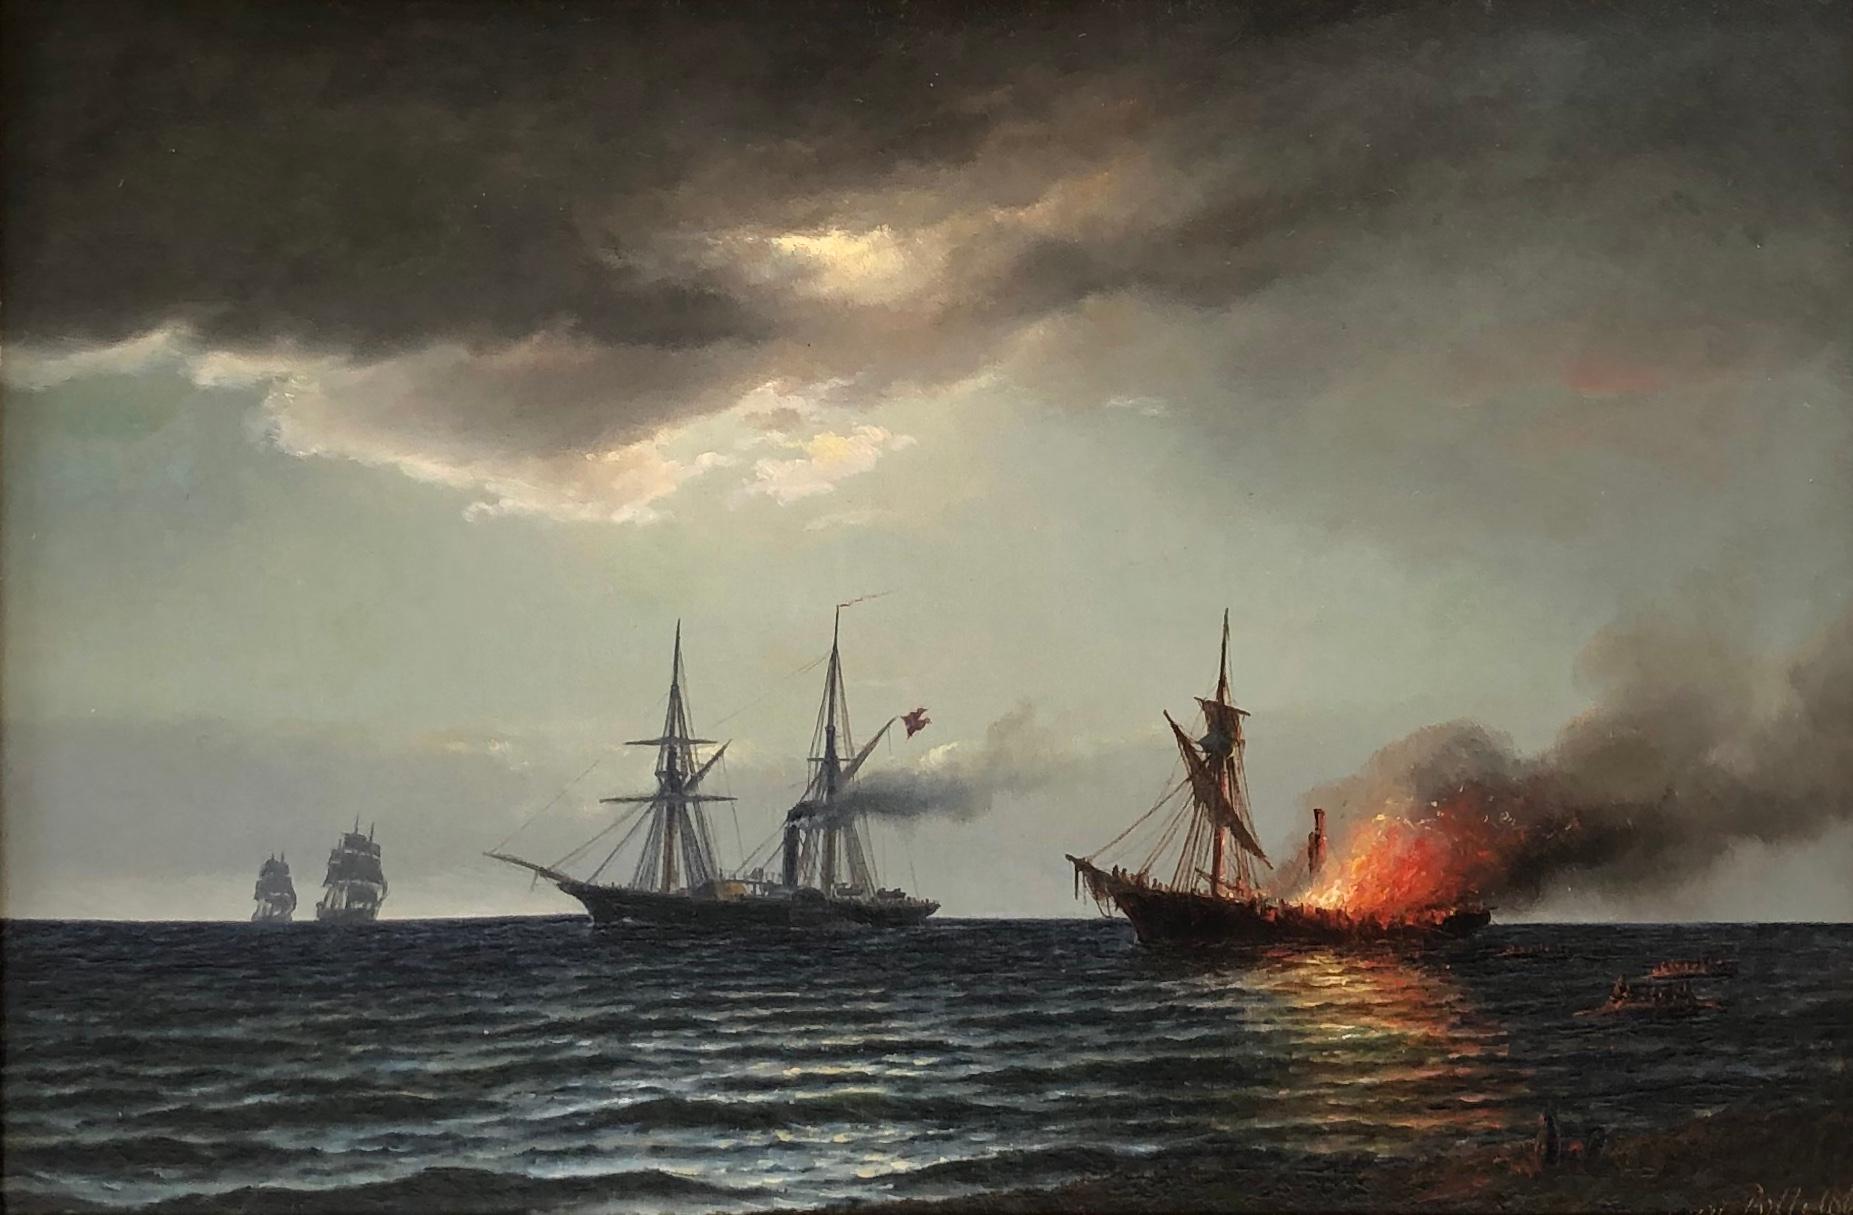 Carl Ludvig Bille, Danish painter, 1815-1898
Oil on canvas, signed. And dated lower right
On the reverse inscribed: The steamer Hekla (E. Suenson). Battle with v.d. Tann. u. a. f. Hafkvig 20/7
Measuring: 12.5